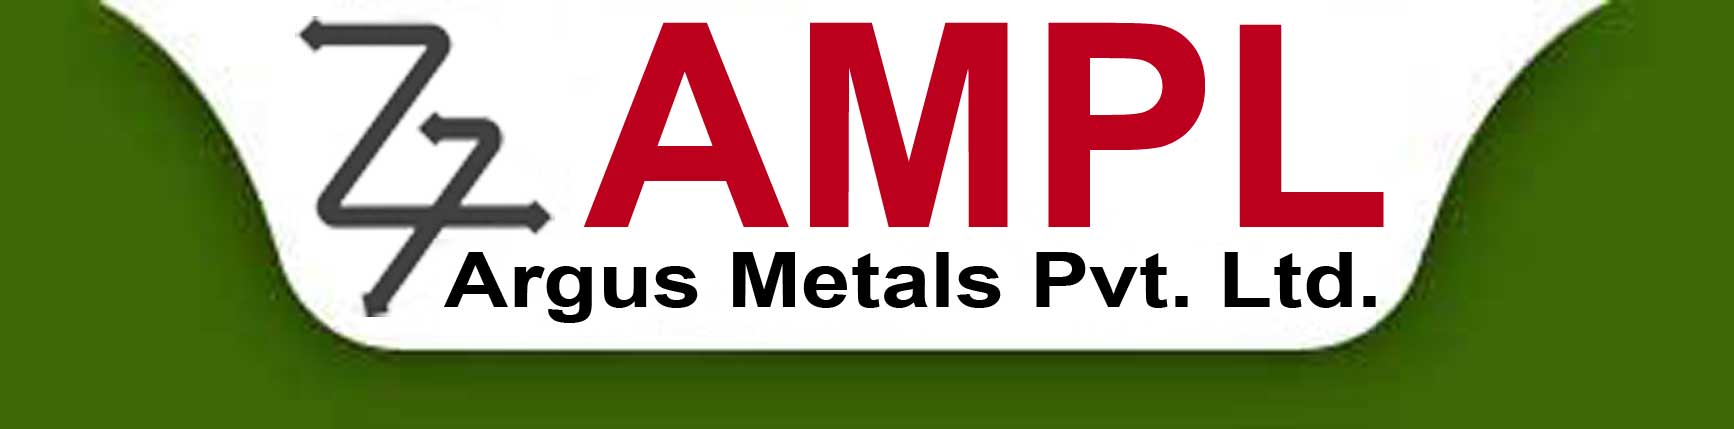 Red Lead Logo - RED LEAD SPECIFICATION || Argus Metals Pvt. Ltd. (AMPL)